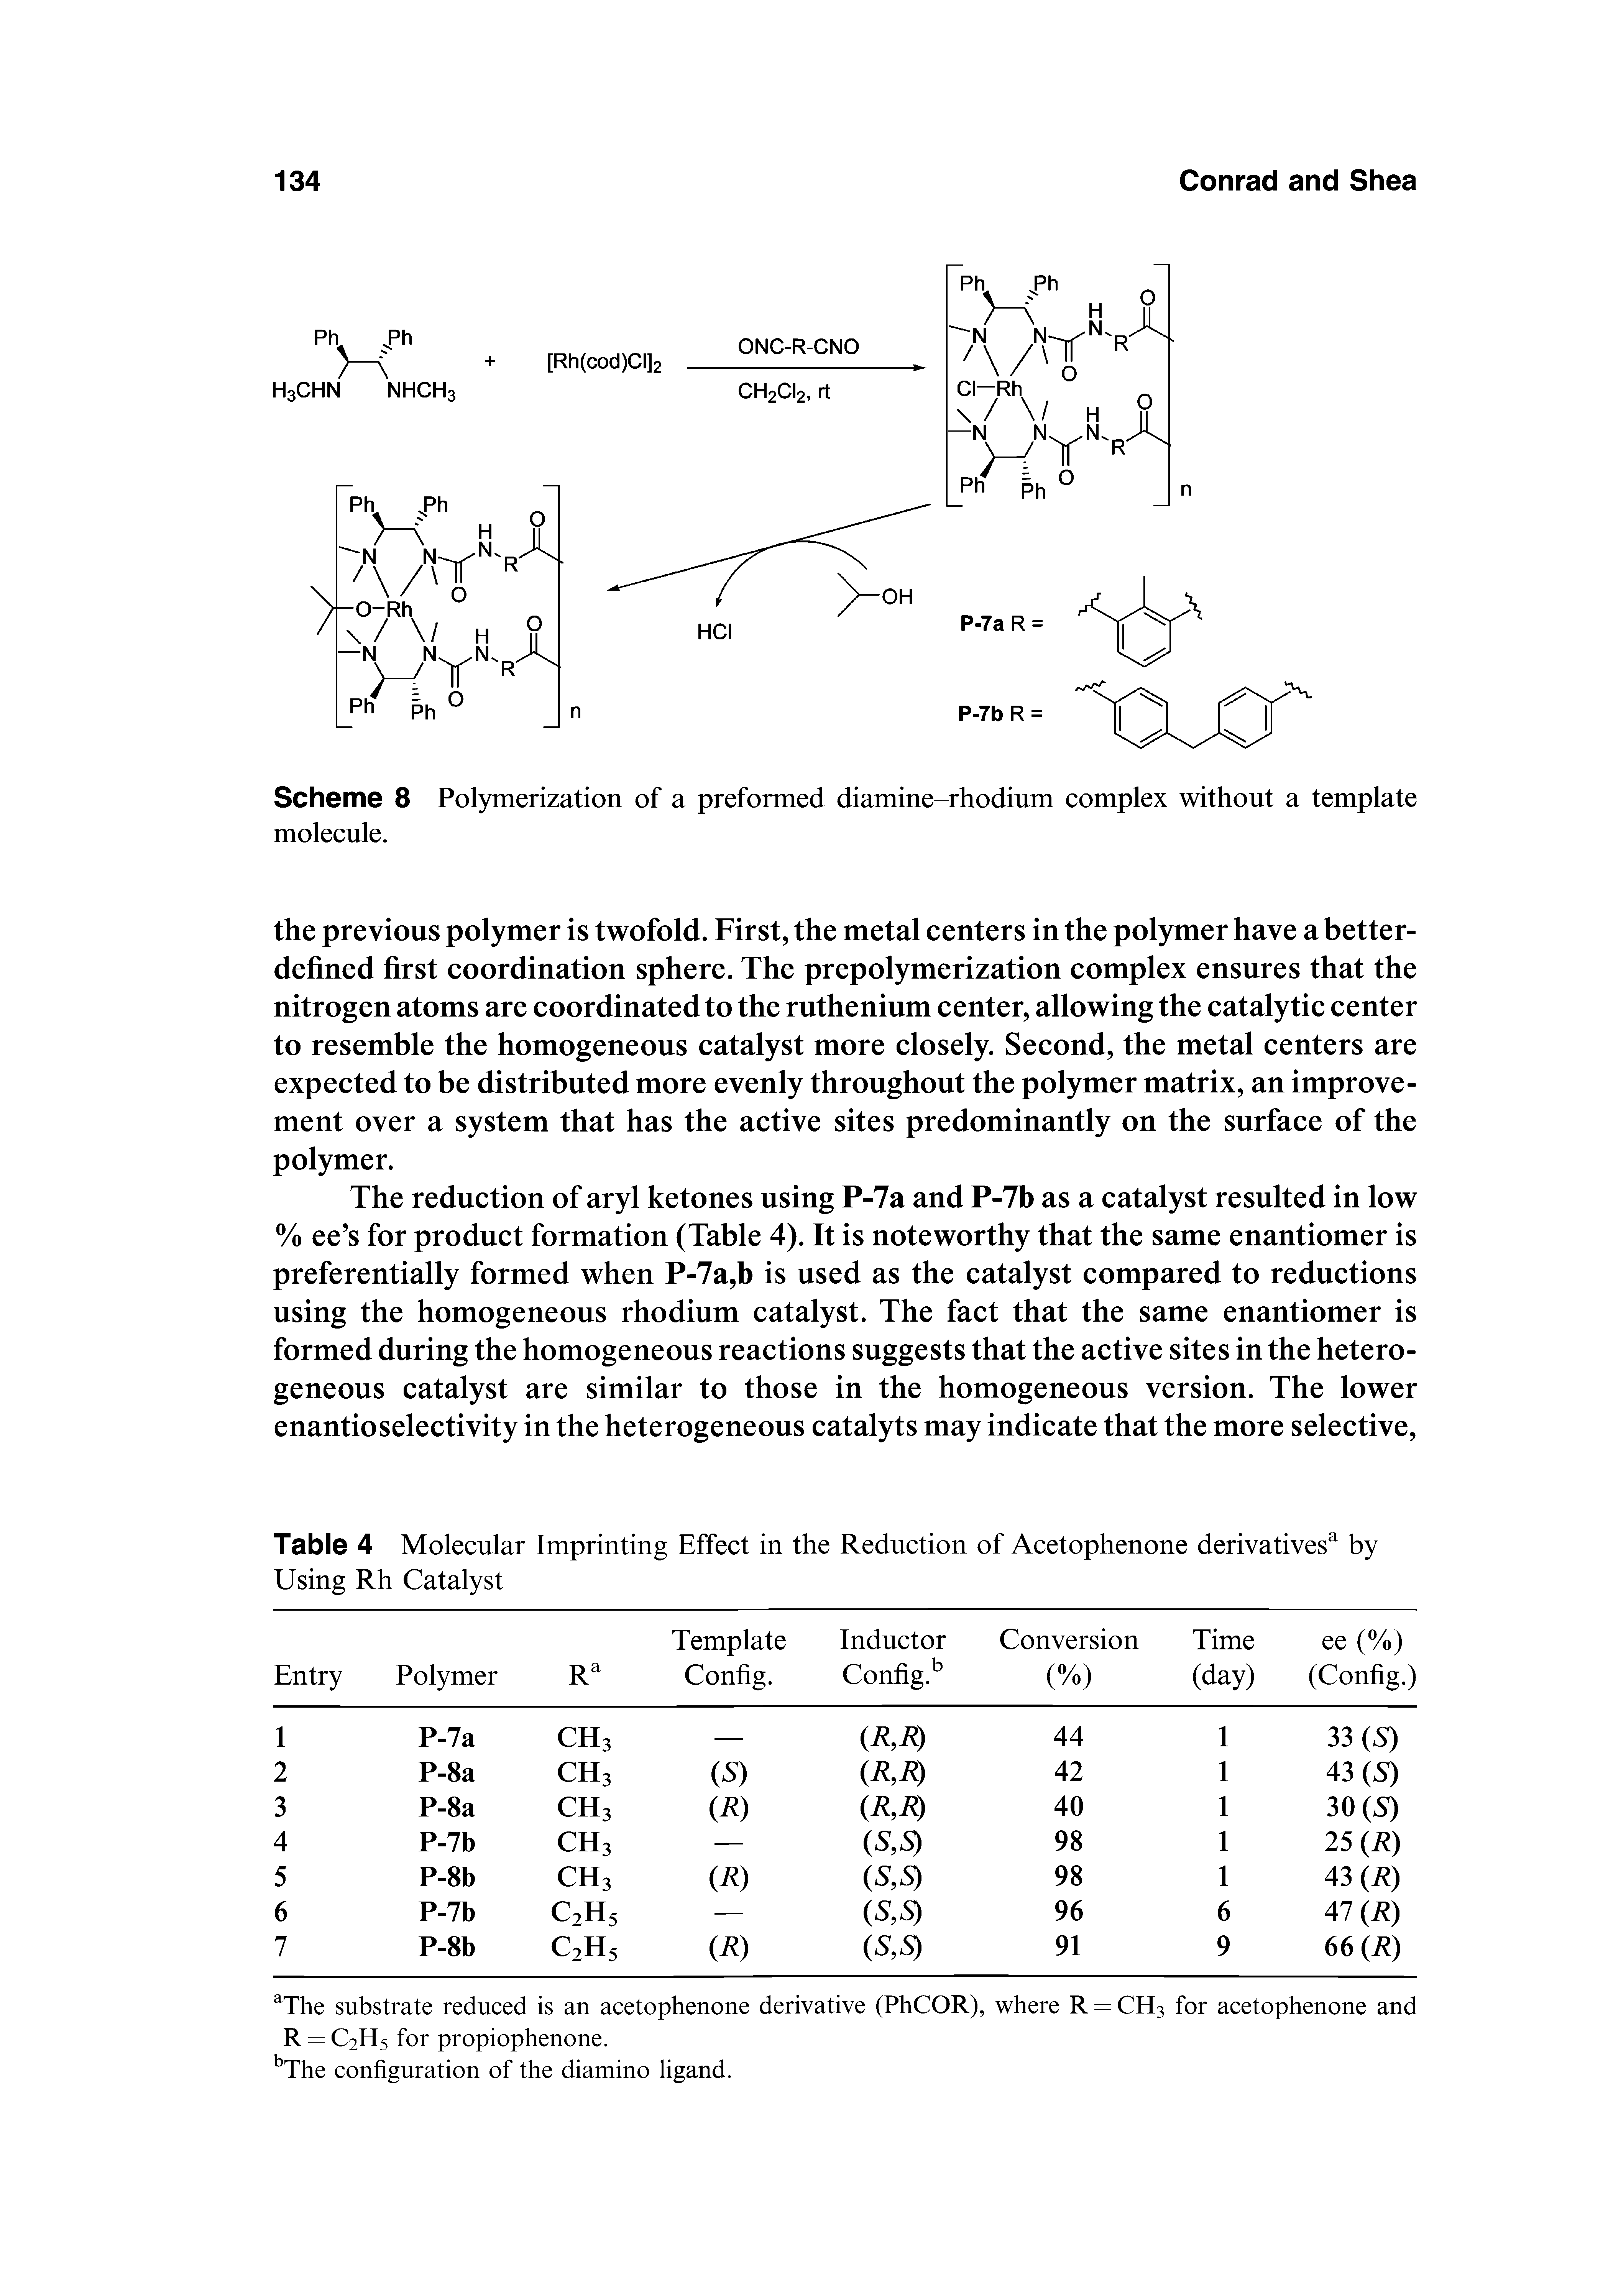 Table 4 Molecular Imprinting Effect in the Reduction of Acetophenone derivatives by Using Rh Catalyst...